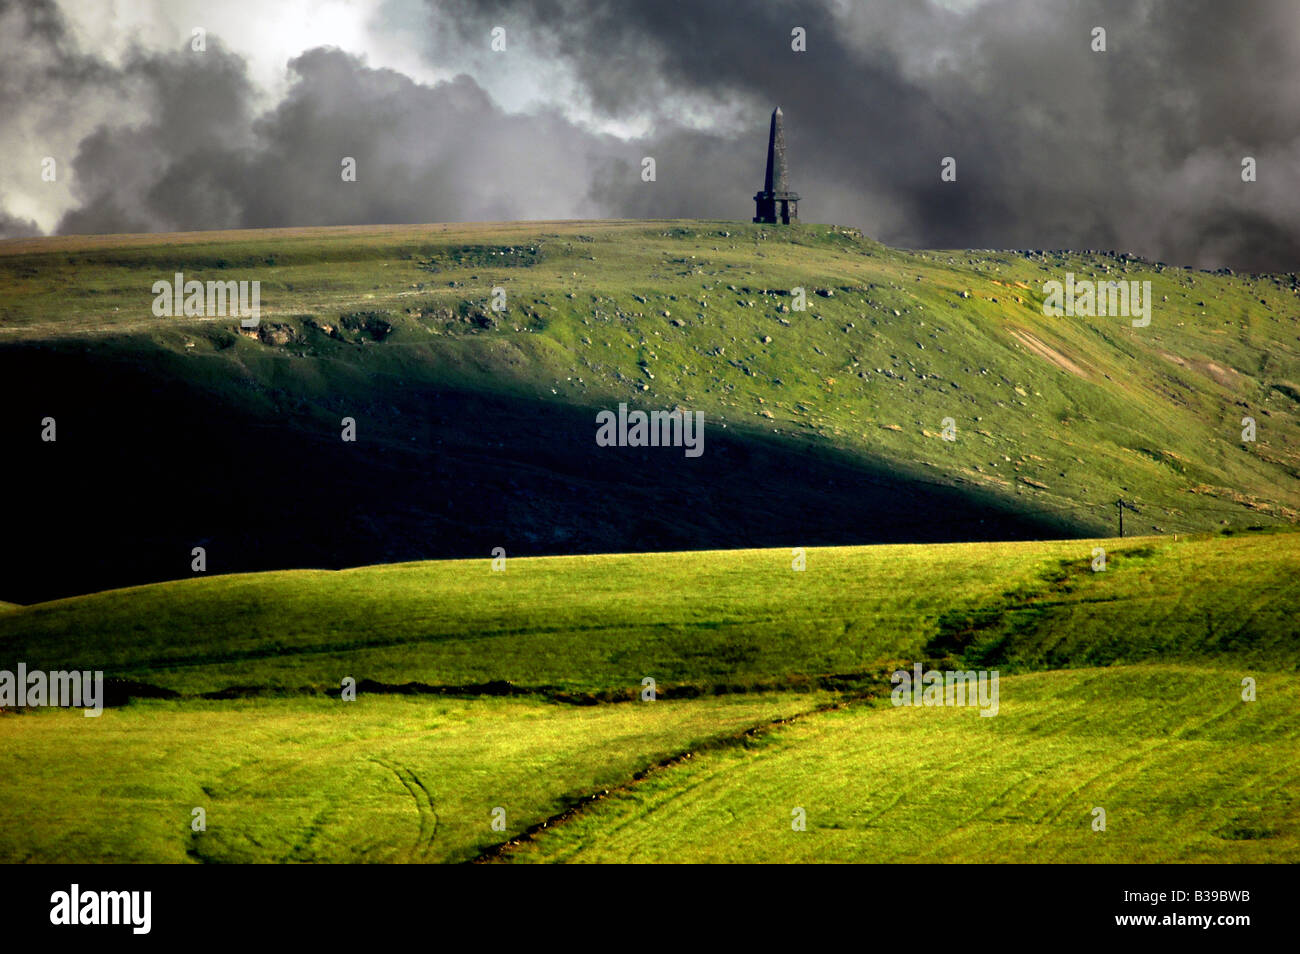 STOODLEY PIKE MONUMENT CALDERDALE WEST YORKSHIRE UK BUILT TO CELEBRATE VICTORY AT THE BATTLE OF WATERLOO Stock Photo